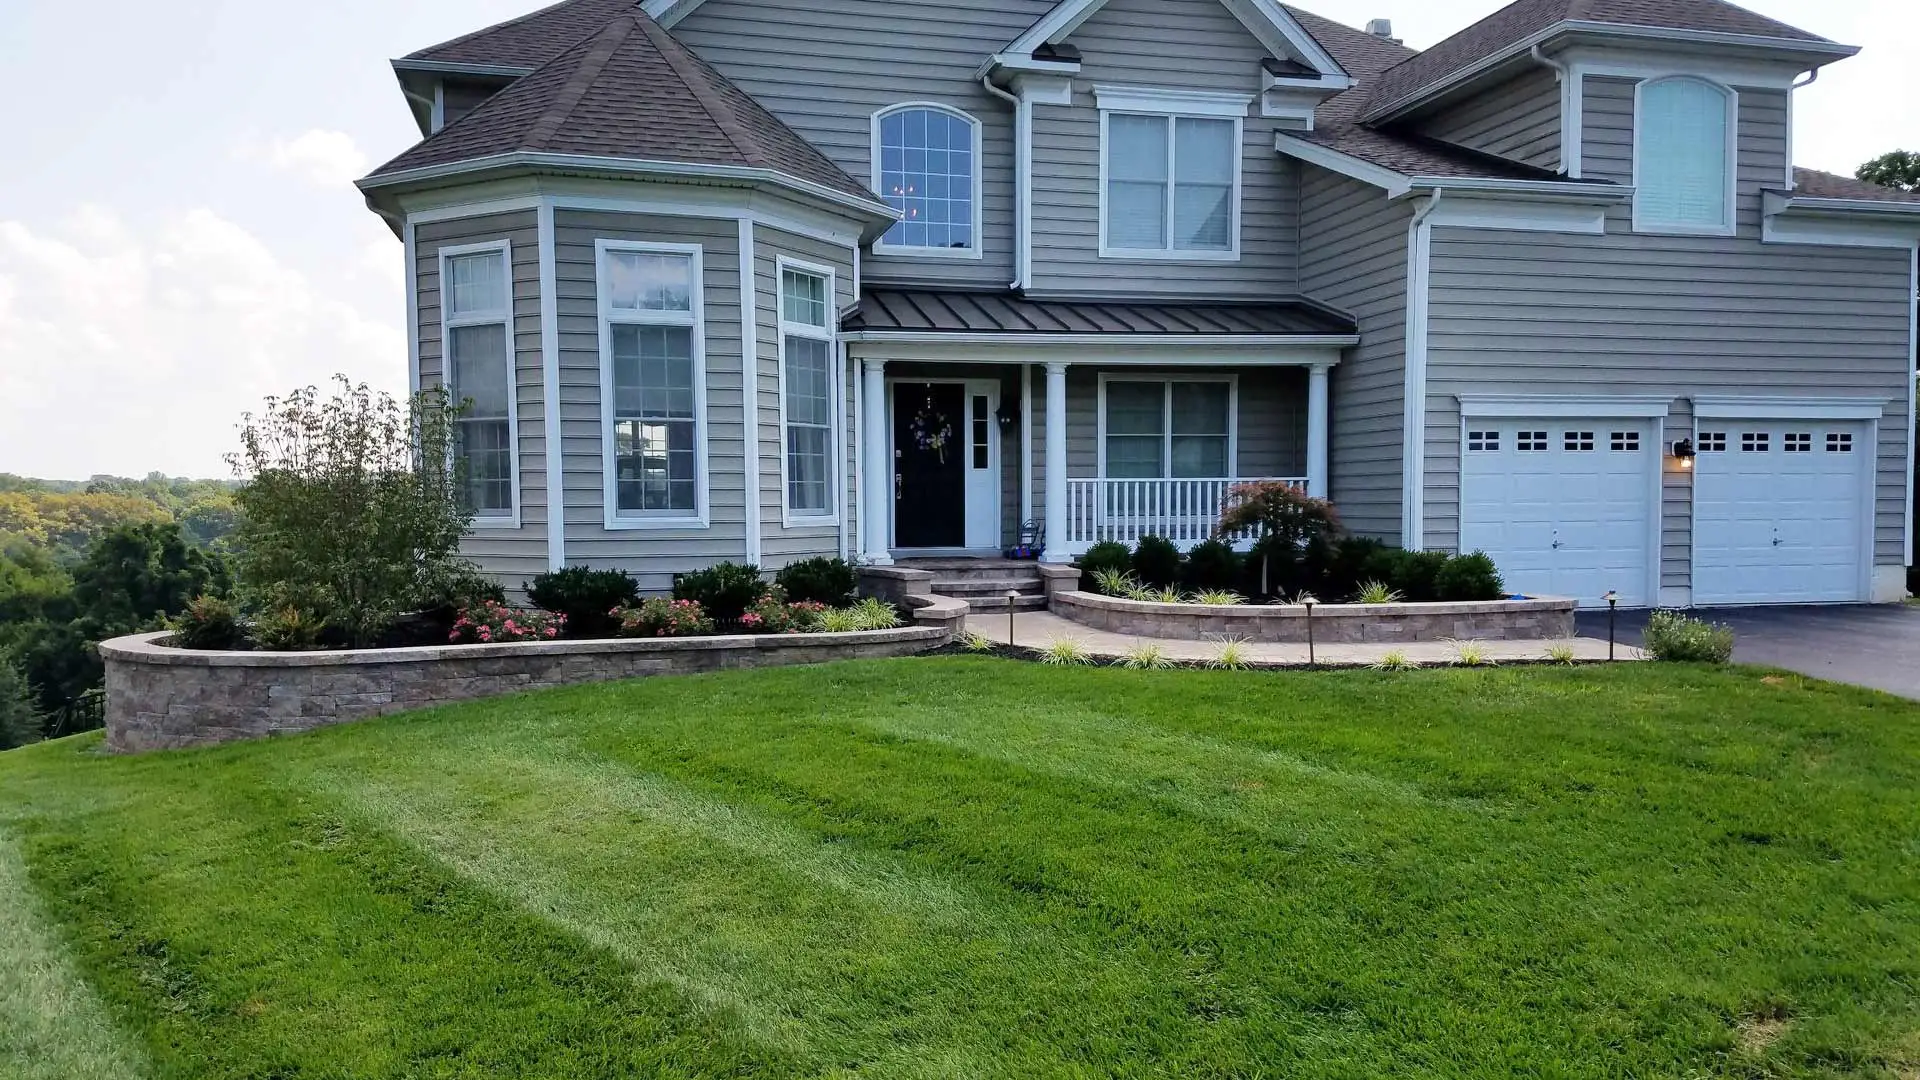 A West Chester, PA home with landscaping and lawn care services.